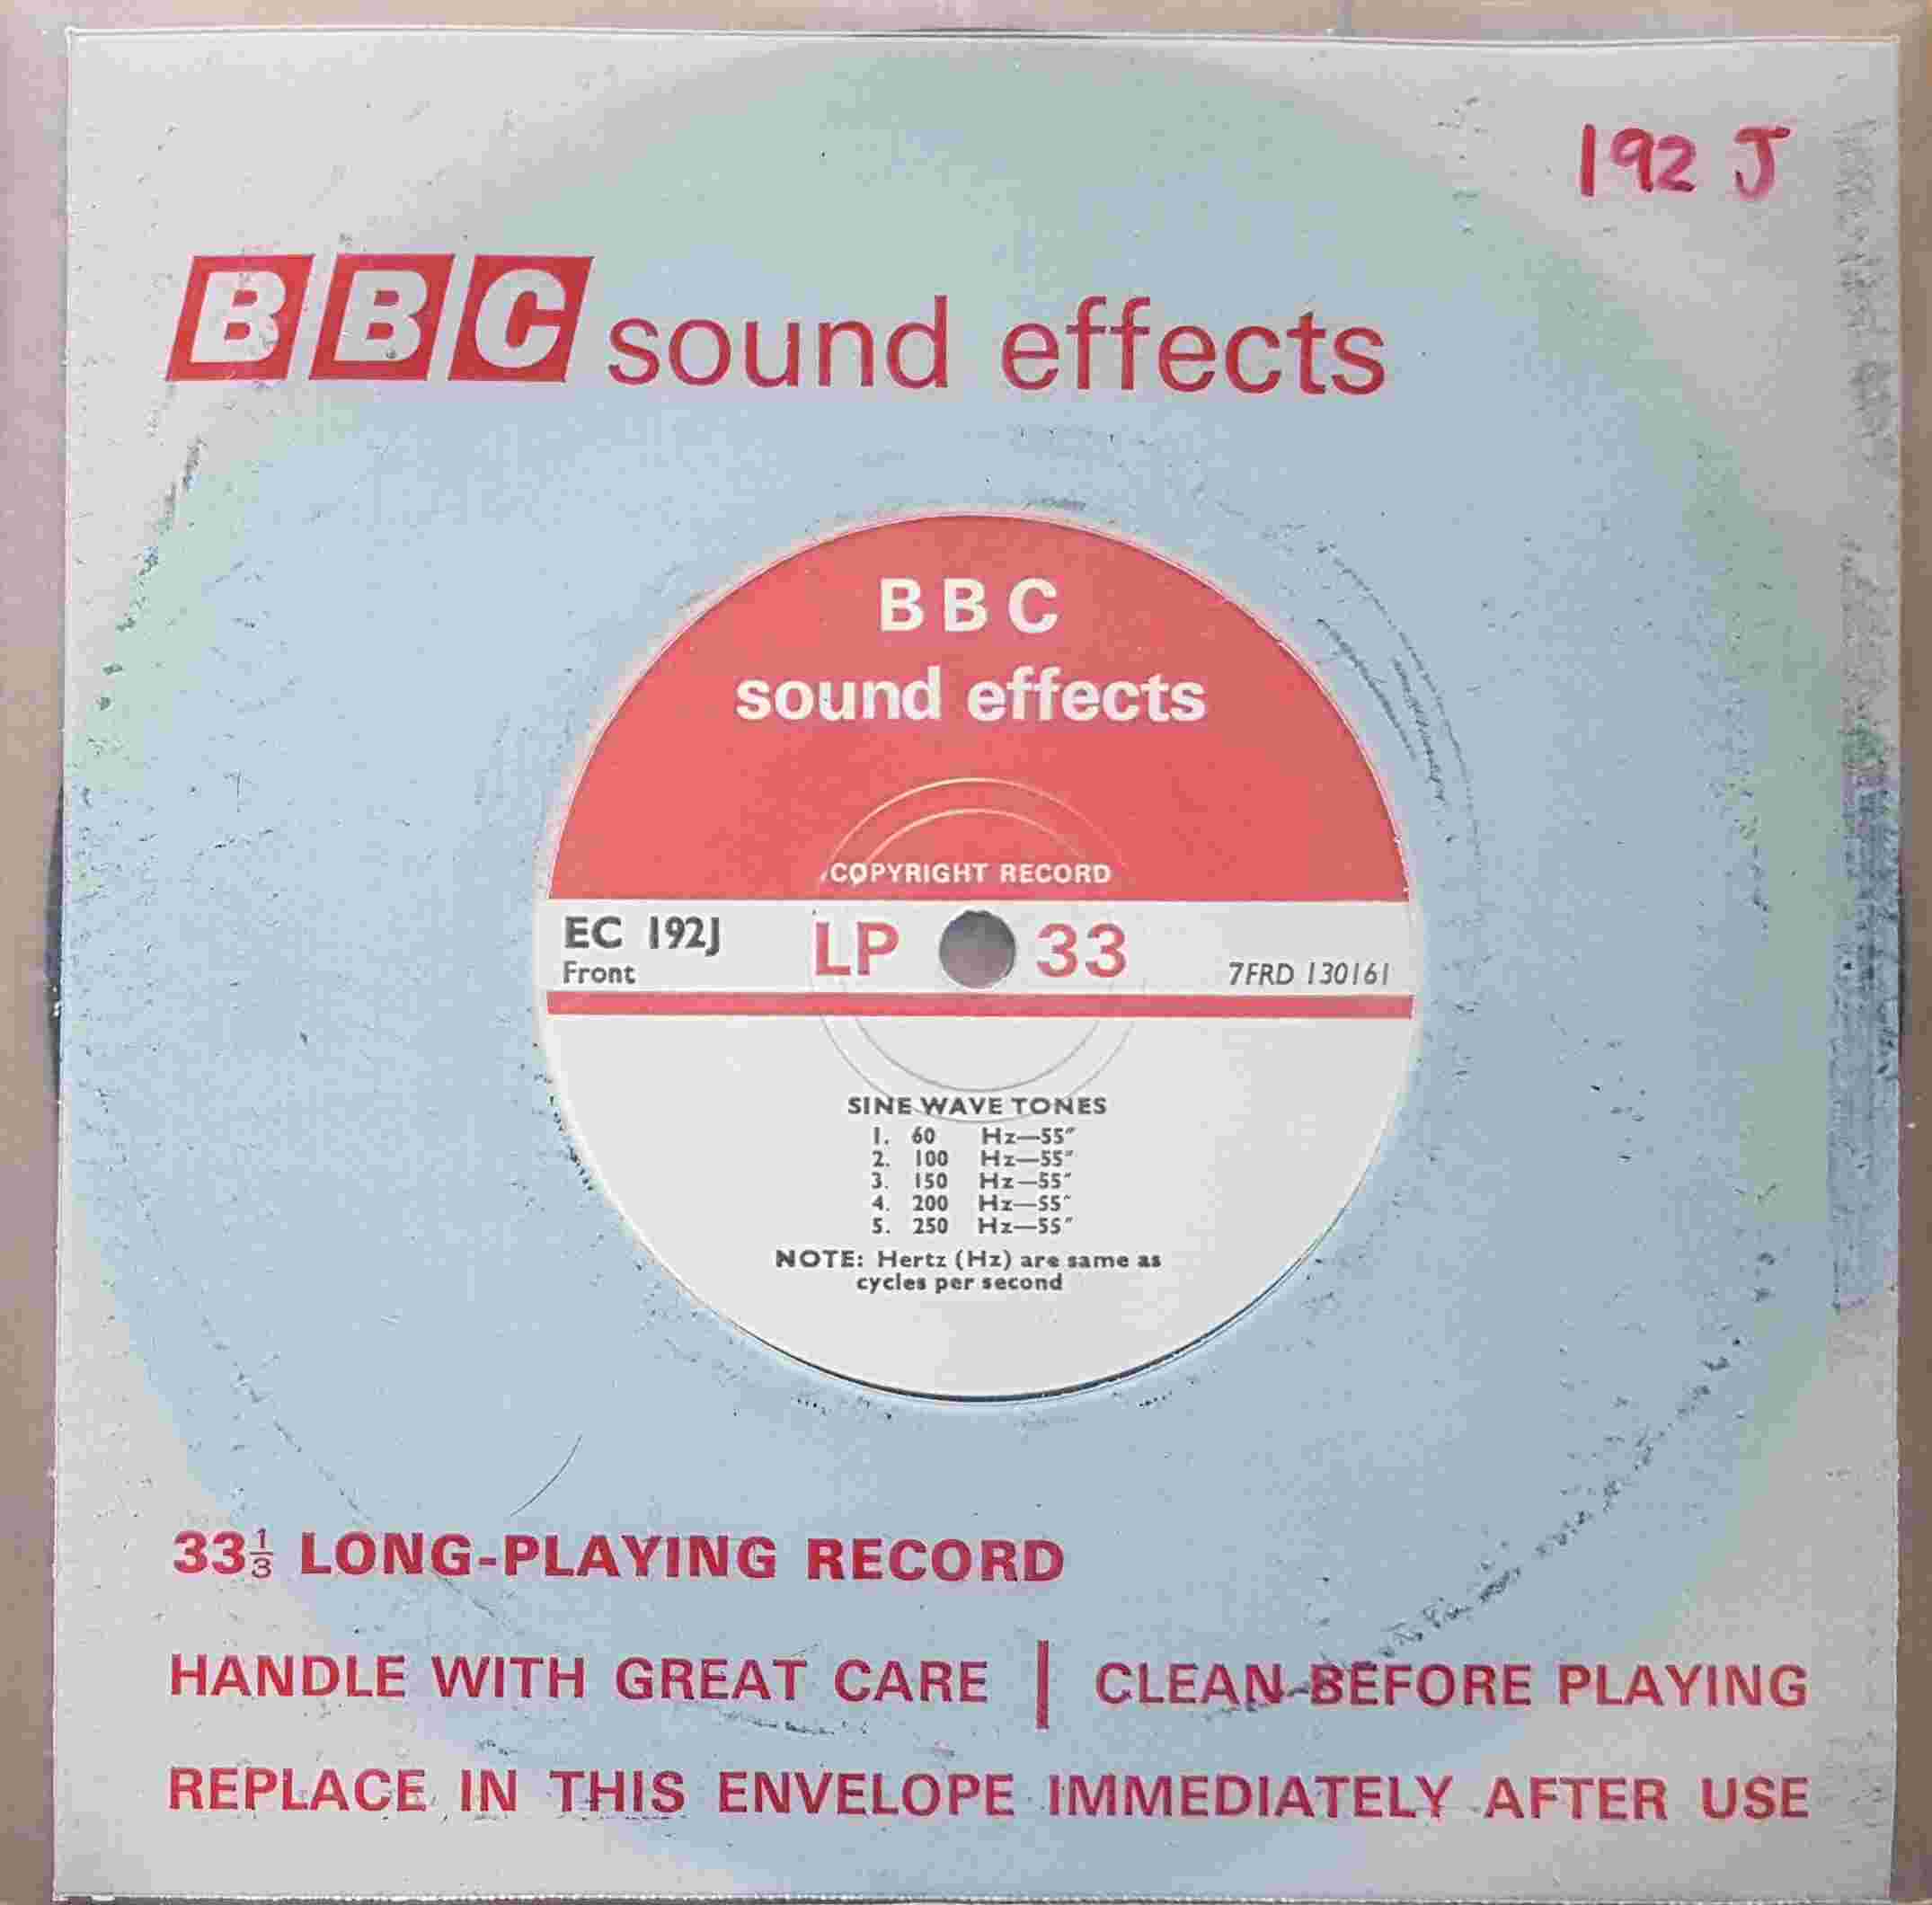 Picture of EC 192J Sine waves tones by artist Not registered from the BBC singles - Records and Tapes library